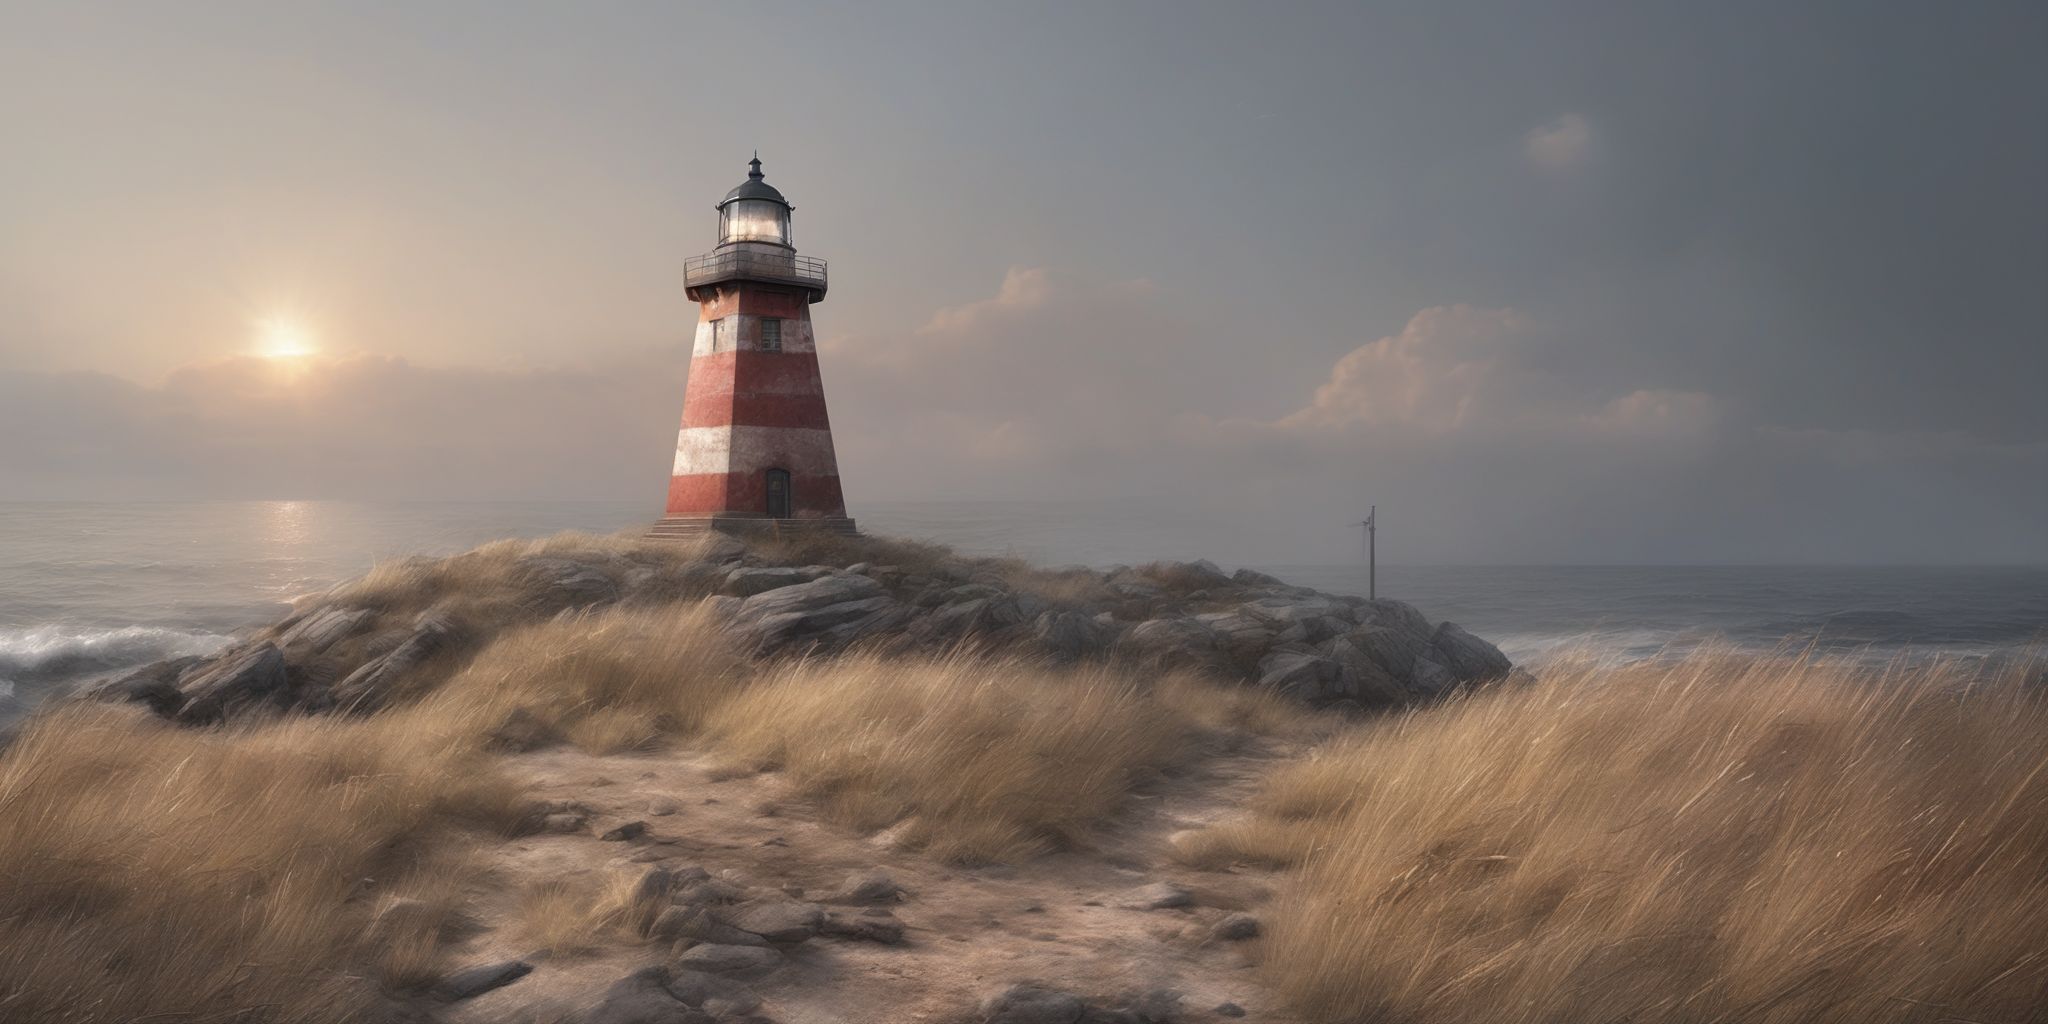 Beacon  in realistic, photographic style